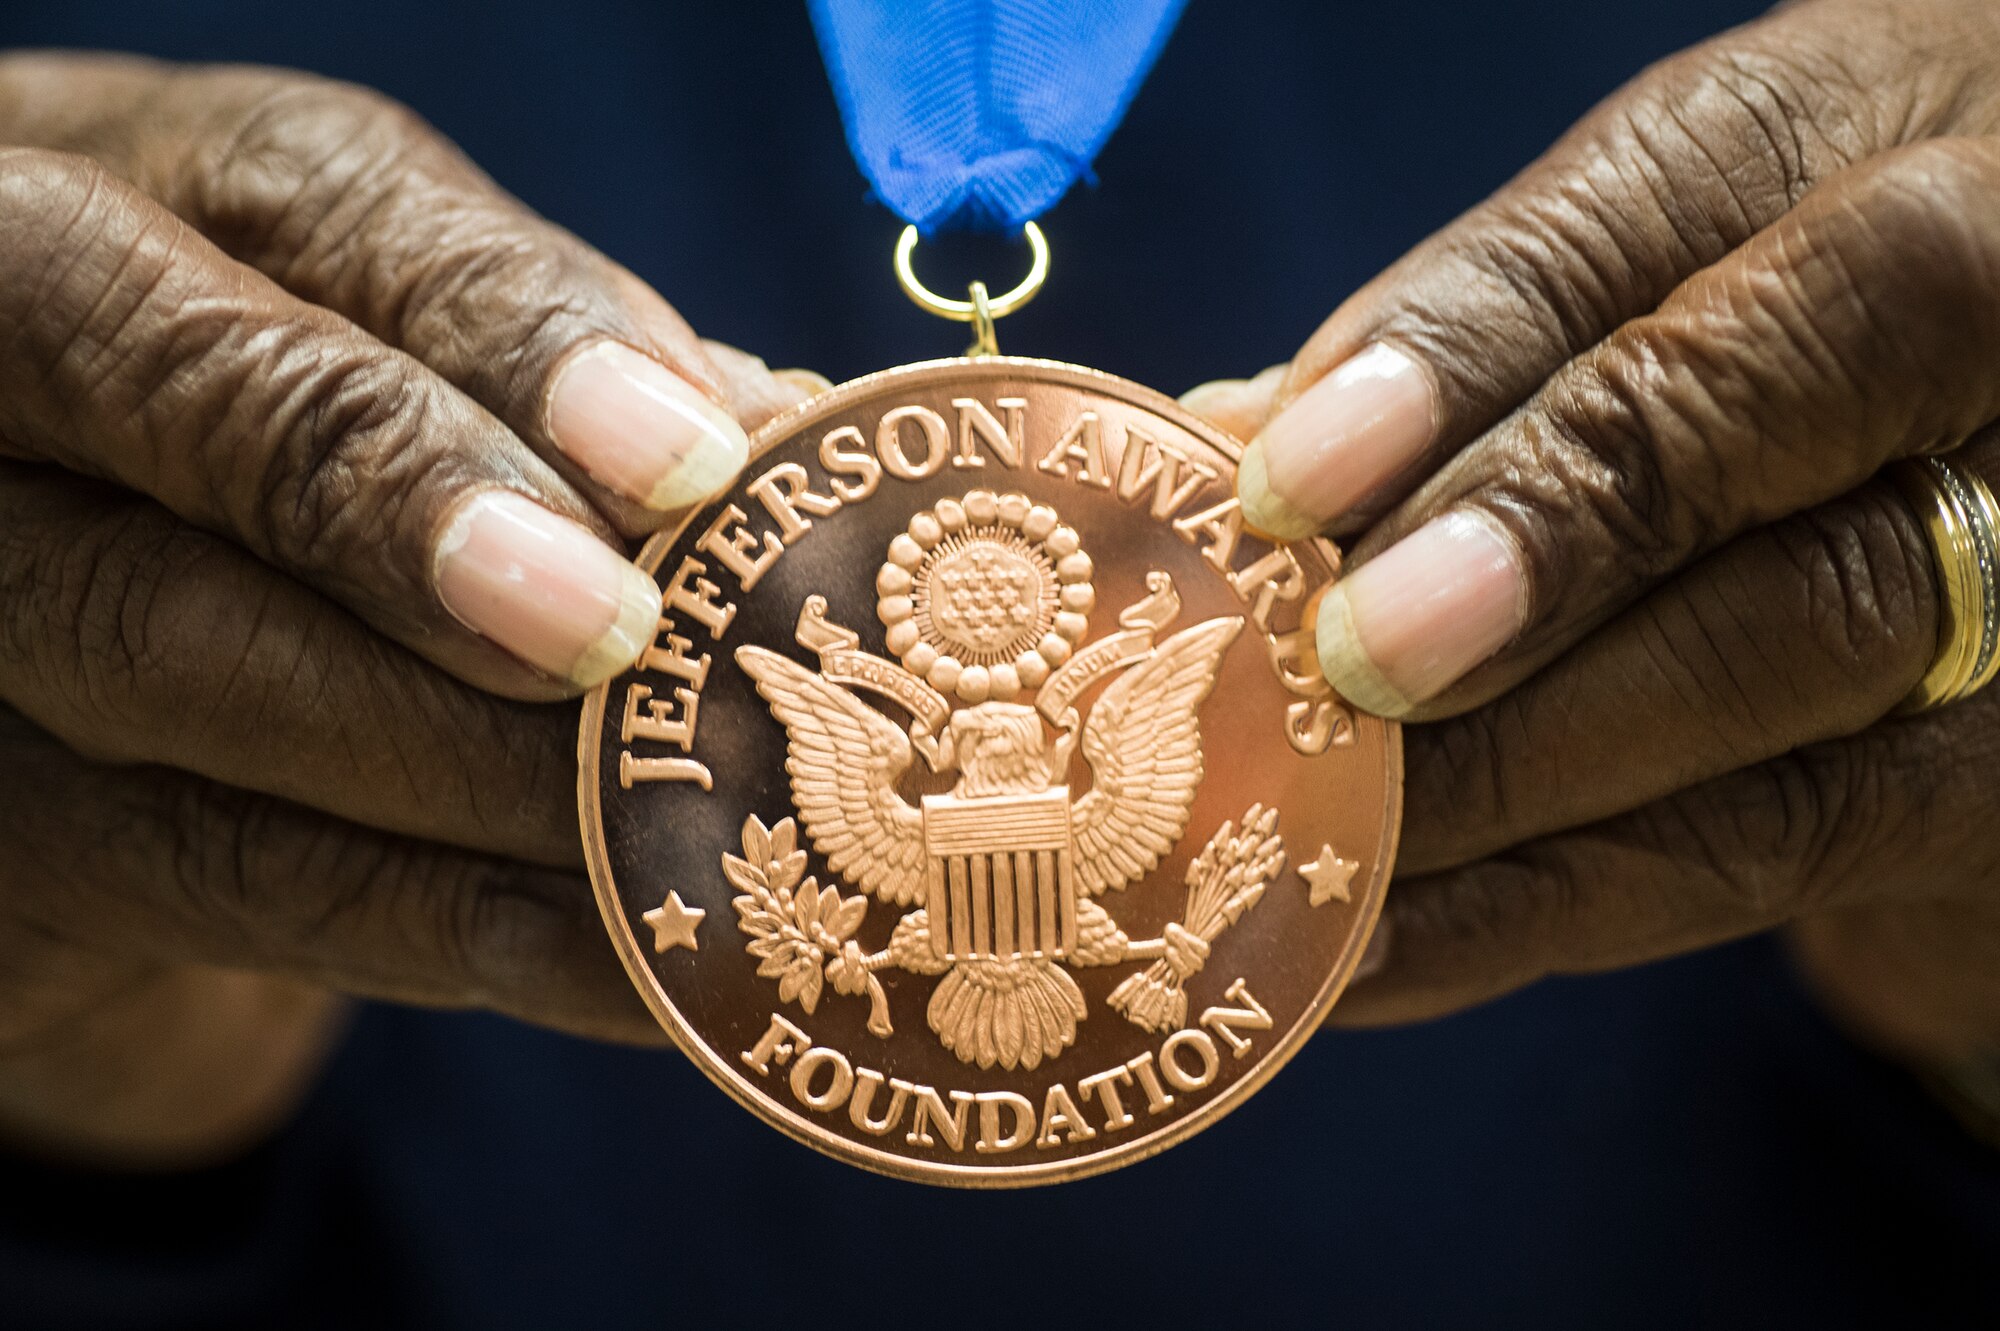 Retired U.S. Air Force Chief Master Sgt. James Ingram, 23d Wing retiree activities office director, grasps his Jefferson Award medal, Jan. 12, 2016, at Moody Air Force Base, Ga. Jacqueline Kennedy Onassis, U.S. Senator Robert Taft, Jr. and Sam Beard founded the Jefferson Award for public service in 1972. (U.S. Air Force photo by Senior Airman Ceaira Tinsley/Released) 